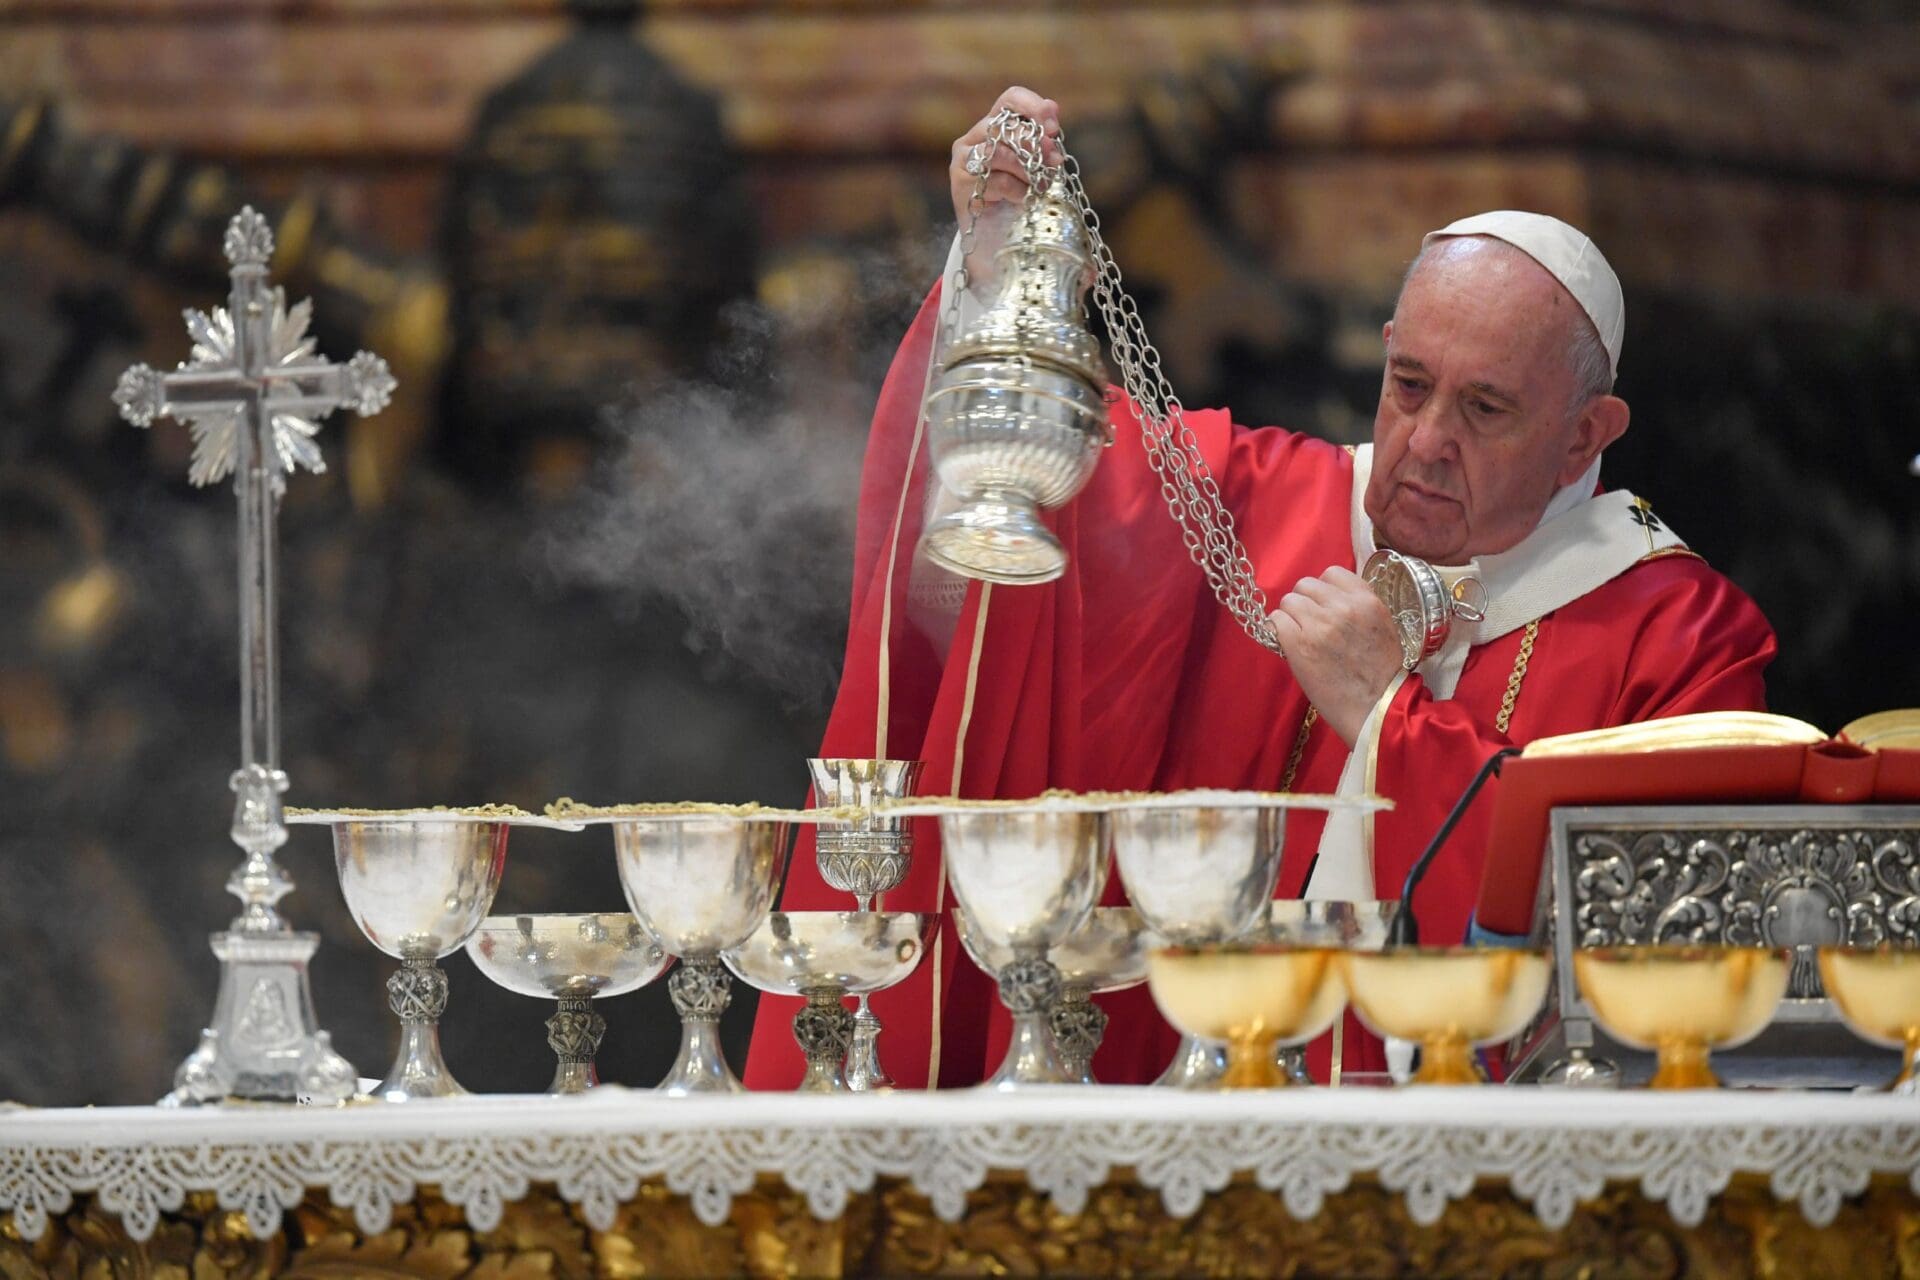 The Use of Incense During the Liturgy of the Eucharist